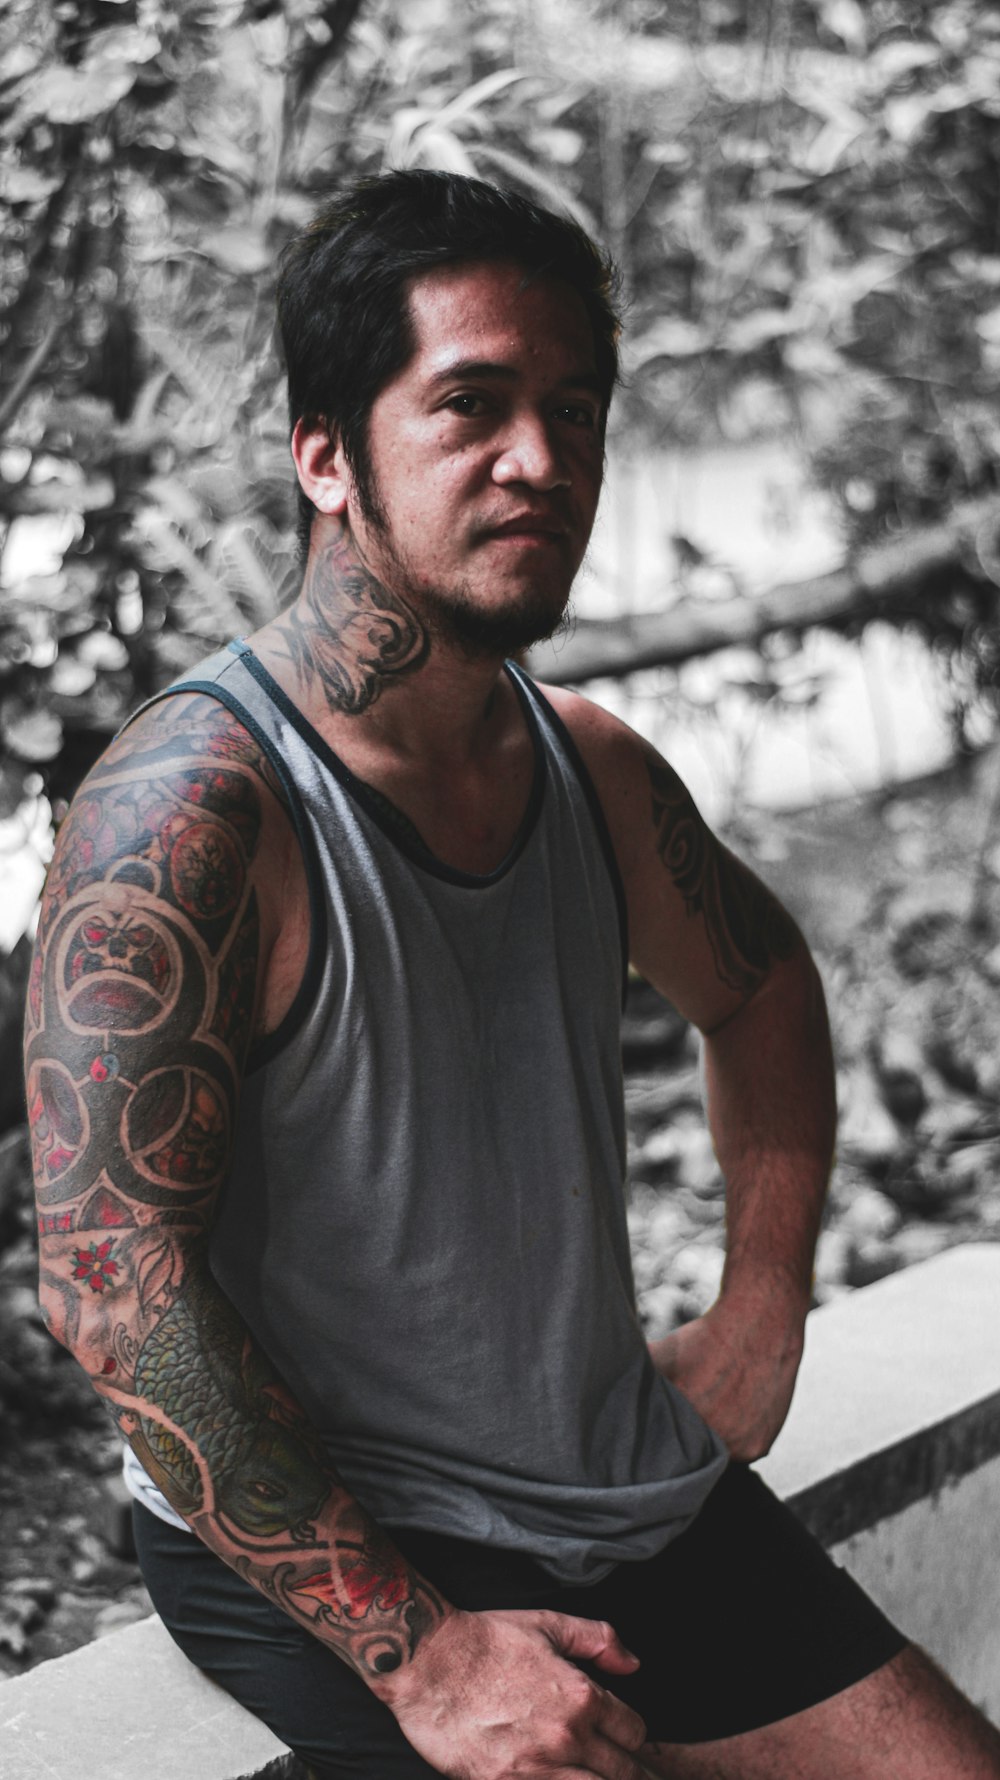 Man in black tank top with red and black tattoo on arm photo – Free Grey  Image on Unsplash